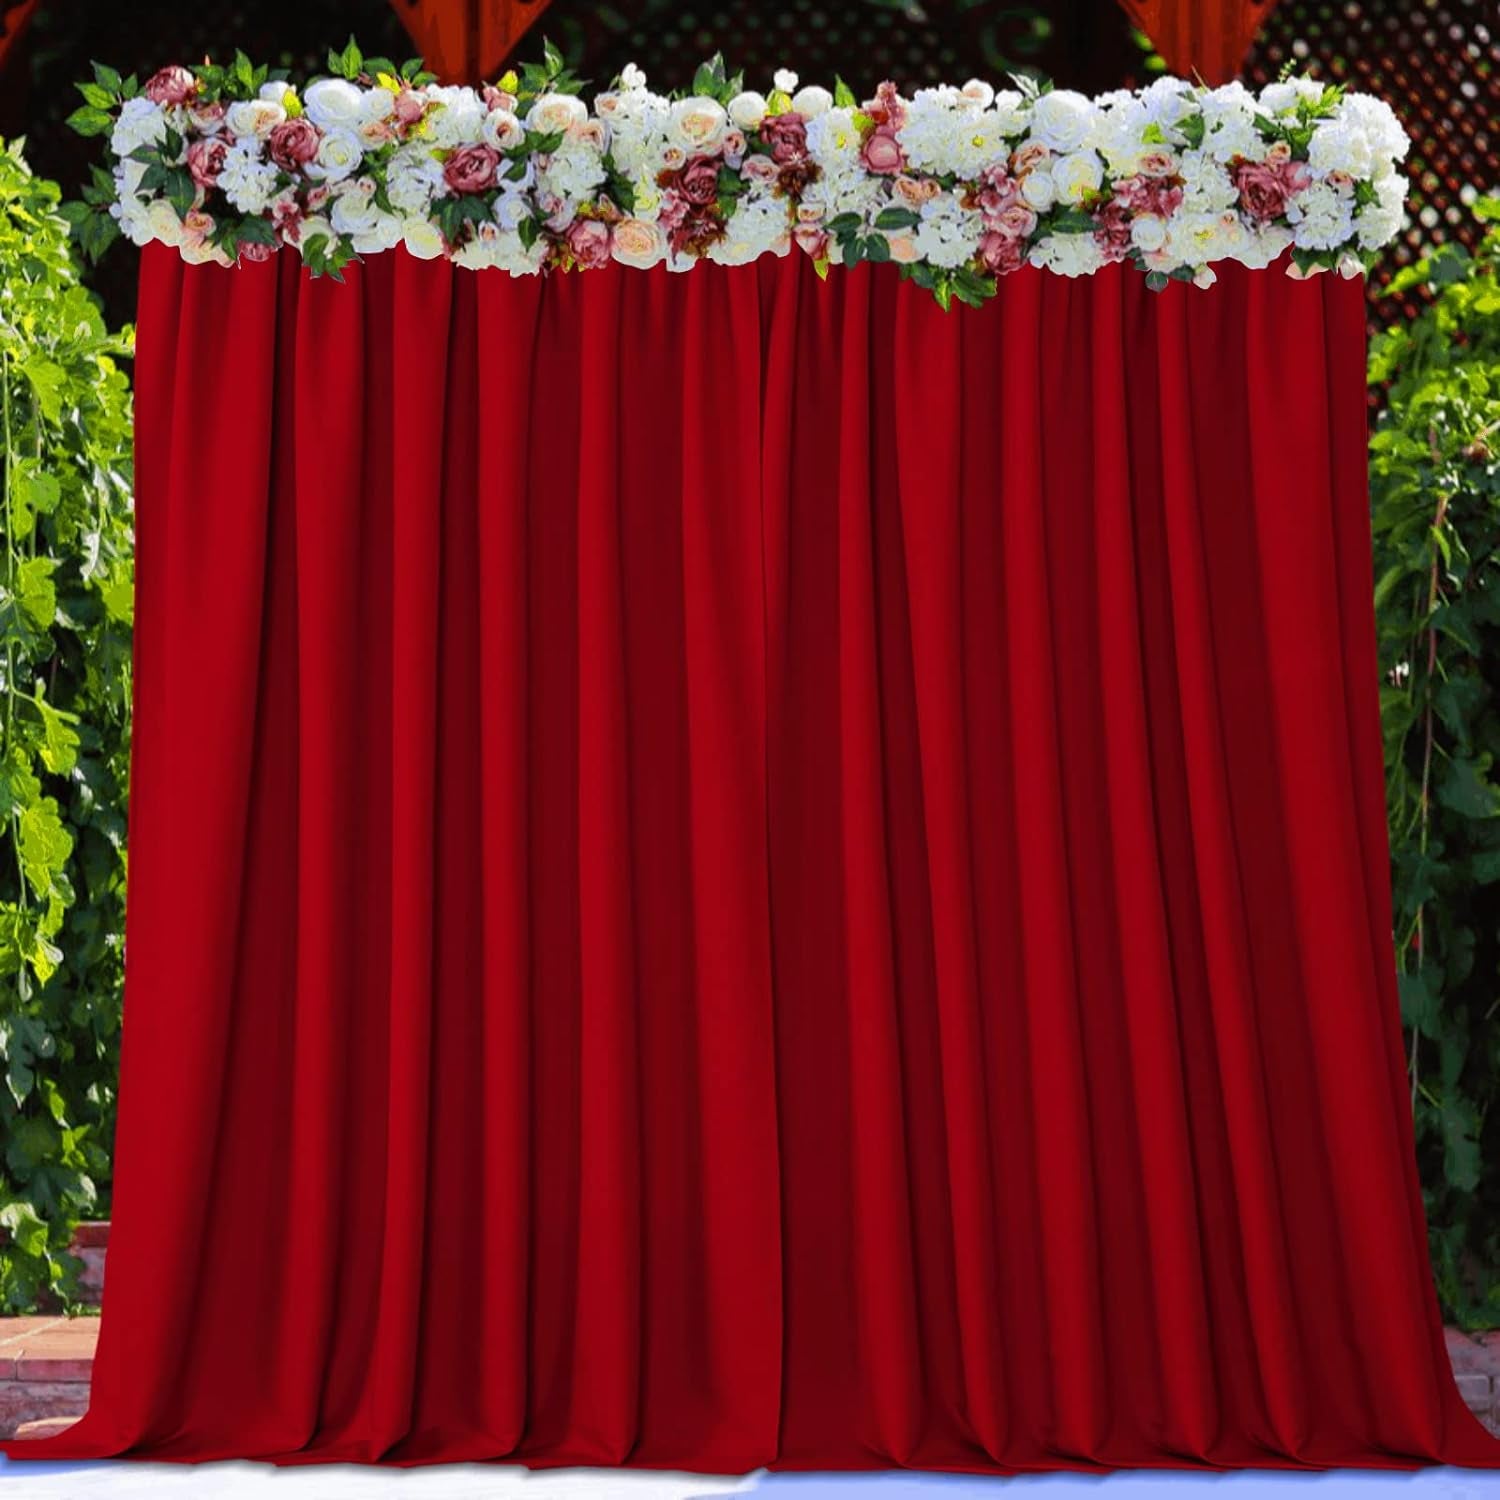 Joydeco White Curtains Backdrop for Wedding Parties, Photo Backdrop Curtains for Wedding Decorations Birthday, Wrinkle Free Polyester 5Ft X 10Ft Fabric Drape 2 Panels with Rod Pockets  Joydeco Red 5Ft X 10Ft X 2 Panels 